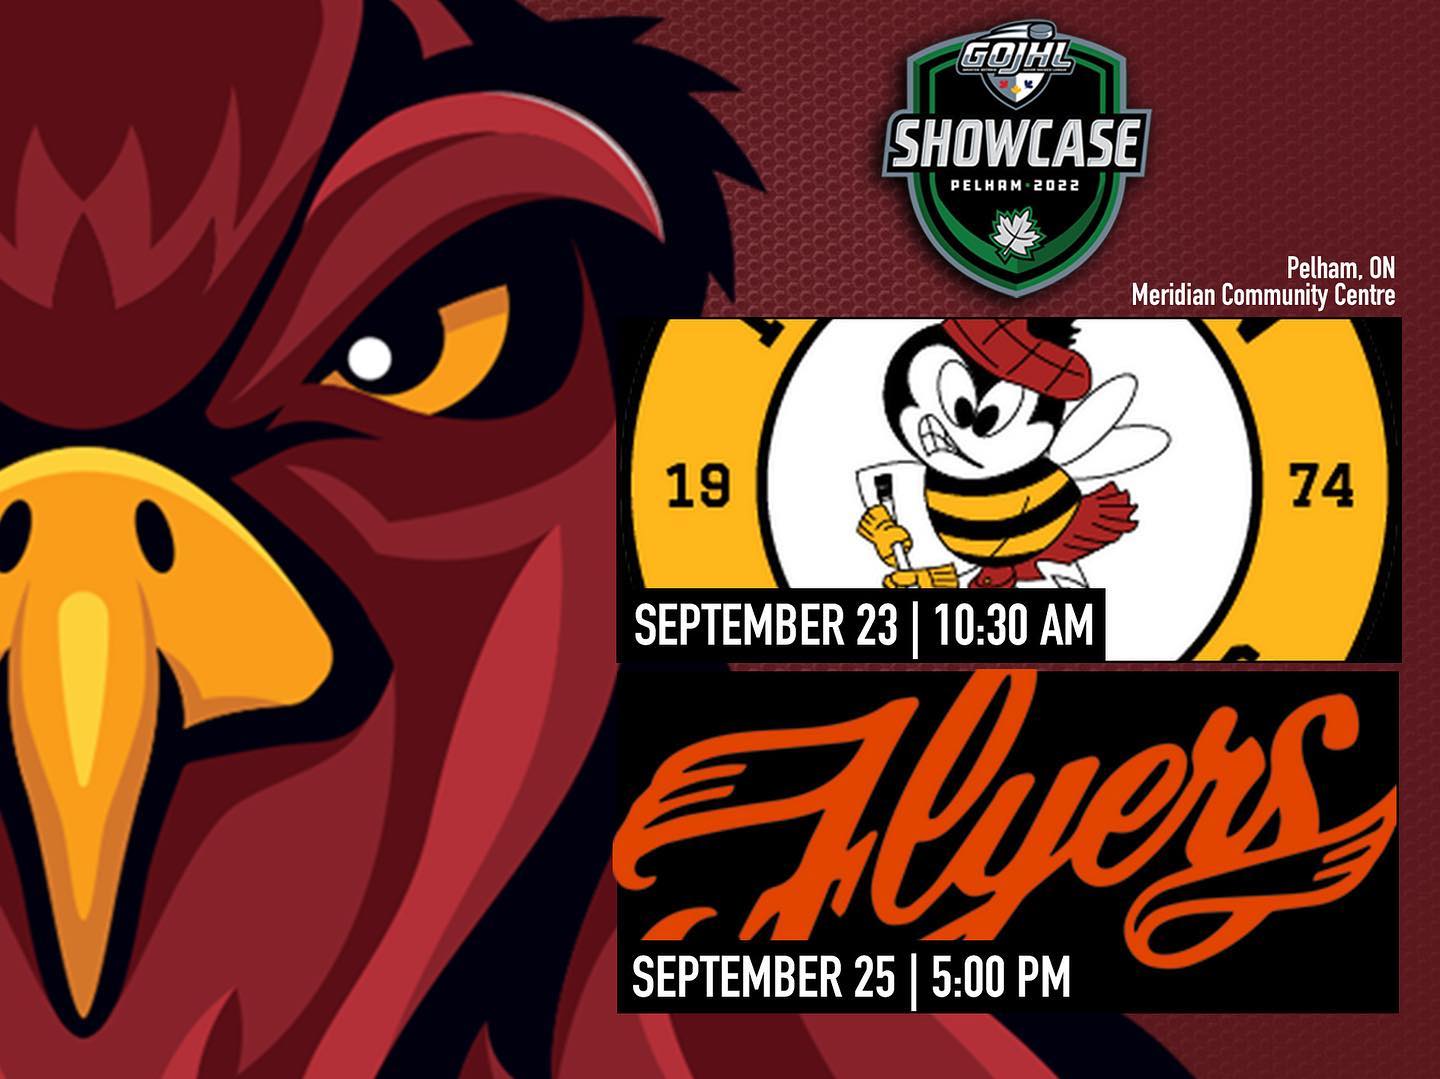 The GOJHL Pelham Showcase is only days away RedHawk fans! We’re staying in Pelham for the weekend to play our two games against Hamilton and Leamington. Let’s see what these other conference teams are made of 🏒

#RedHawksRiseUp #PelhamShowcase2022